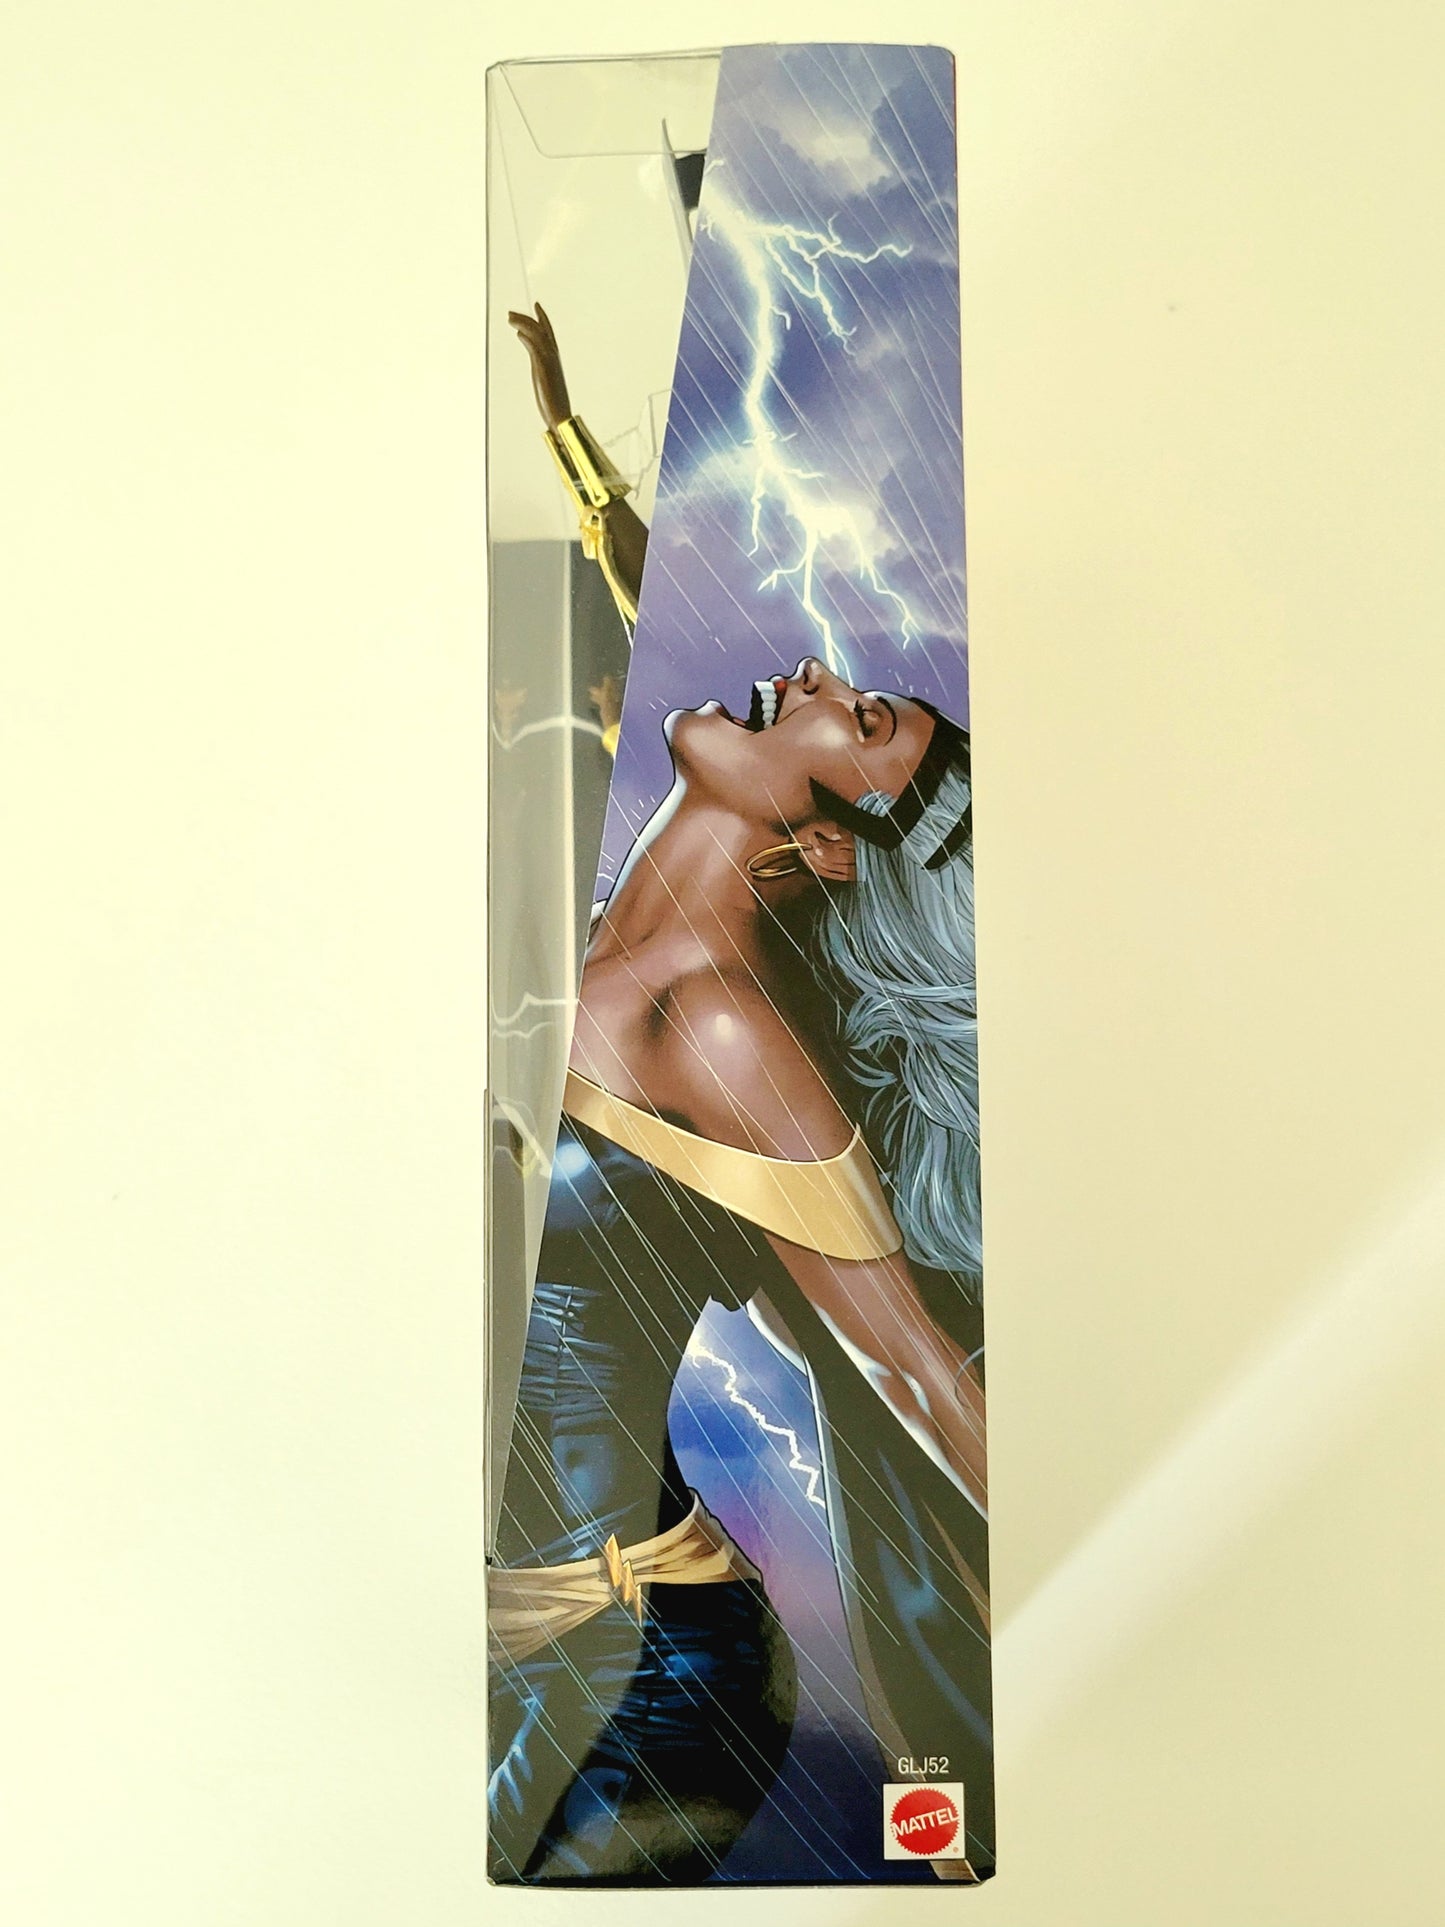 Marvel Storm Barbie Doll from Barbie Signature Collection